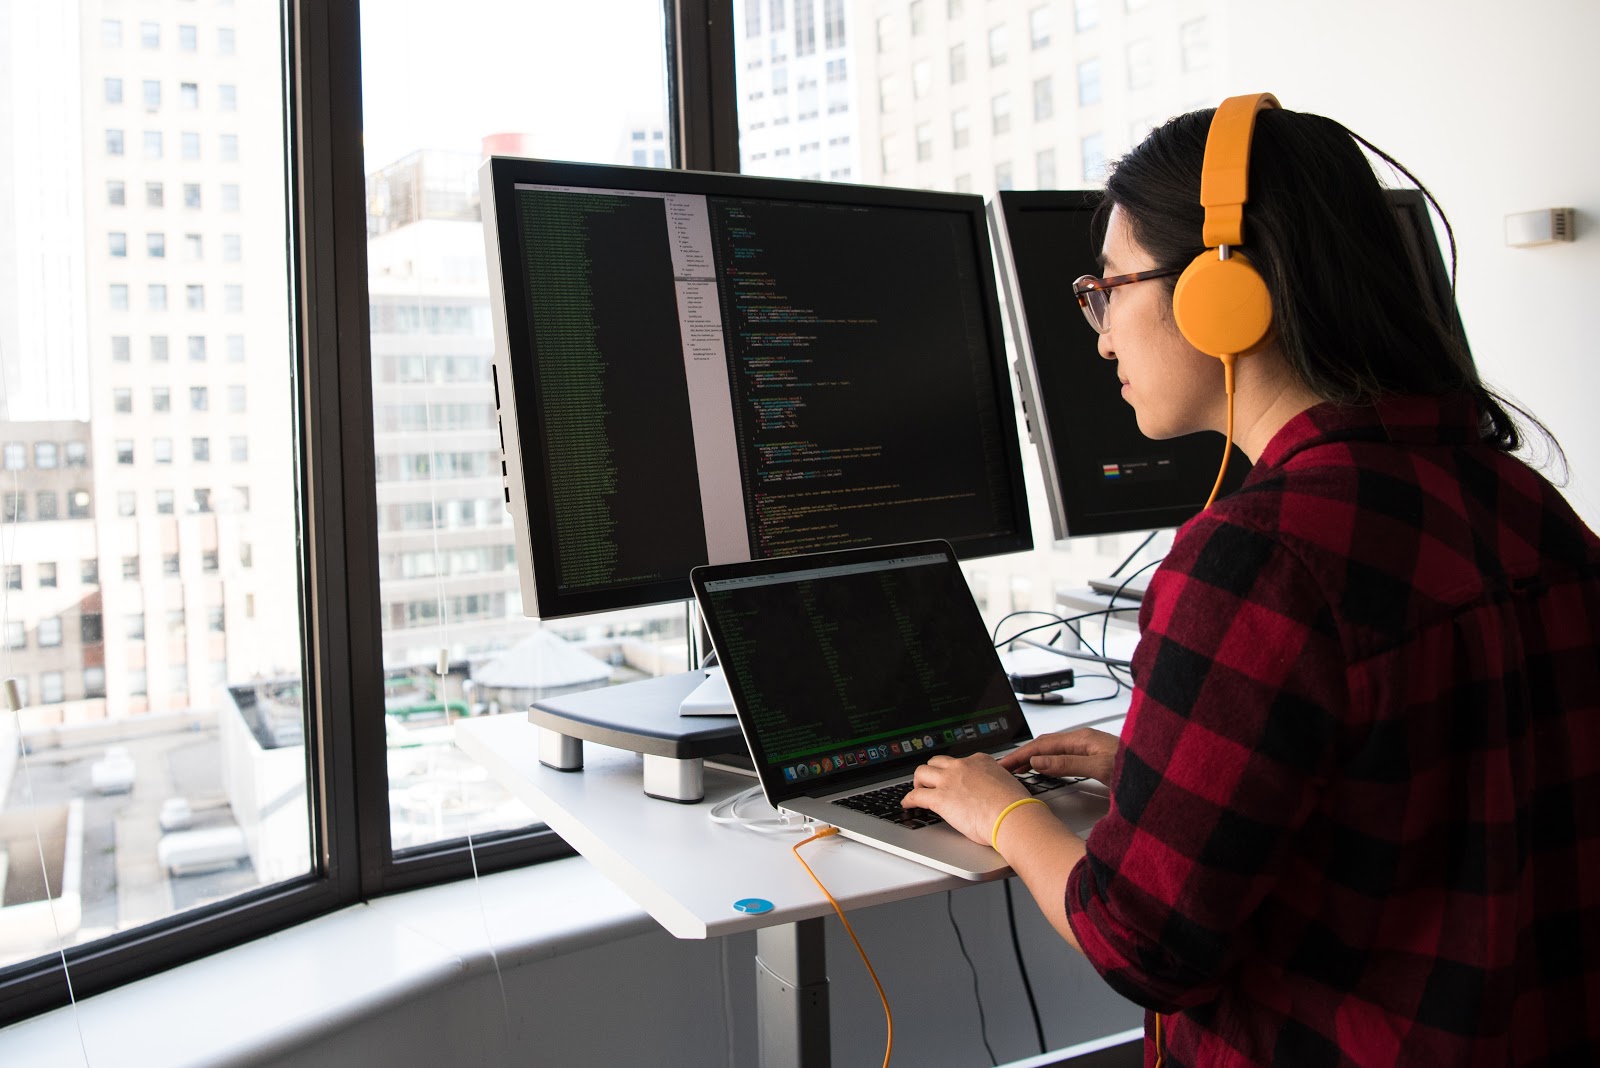 A woman wears headphones and works on a computer